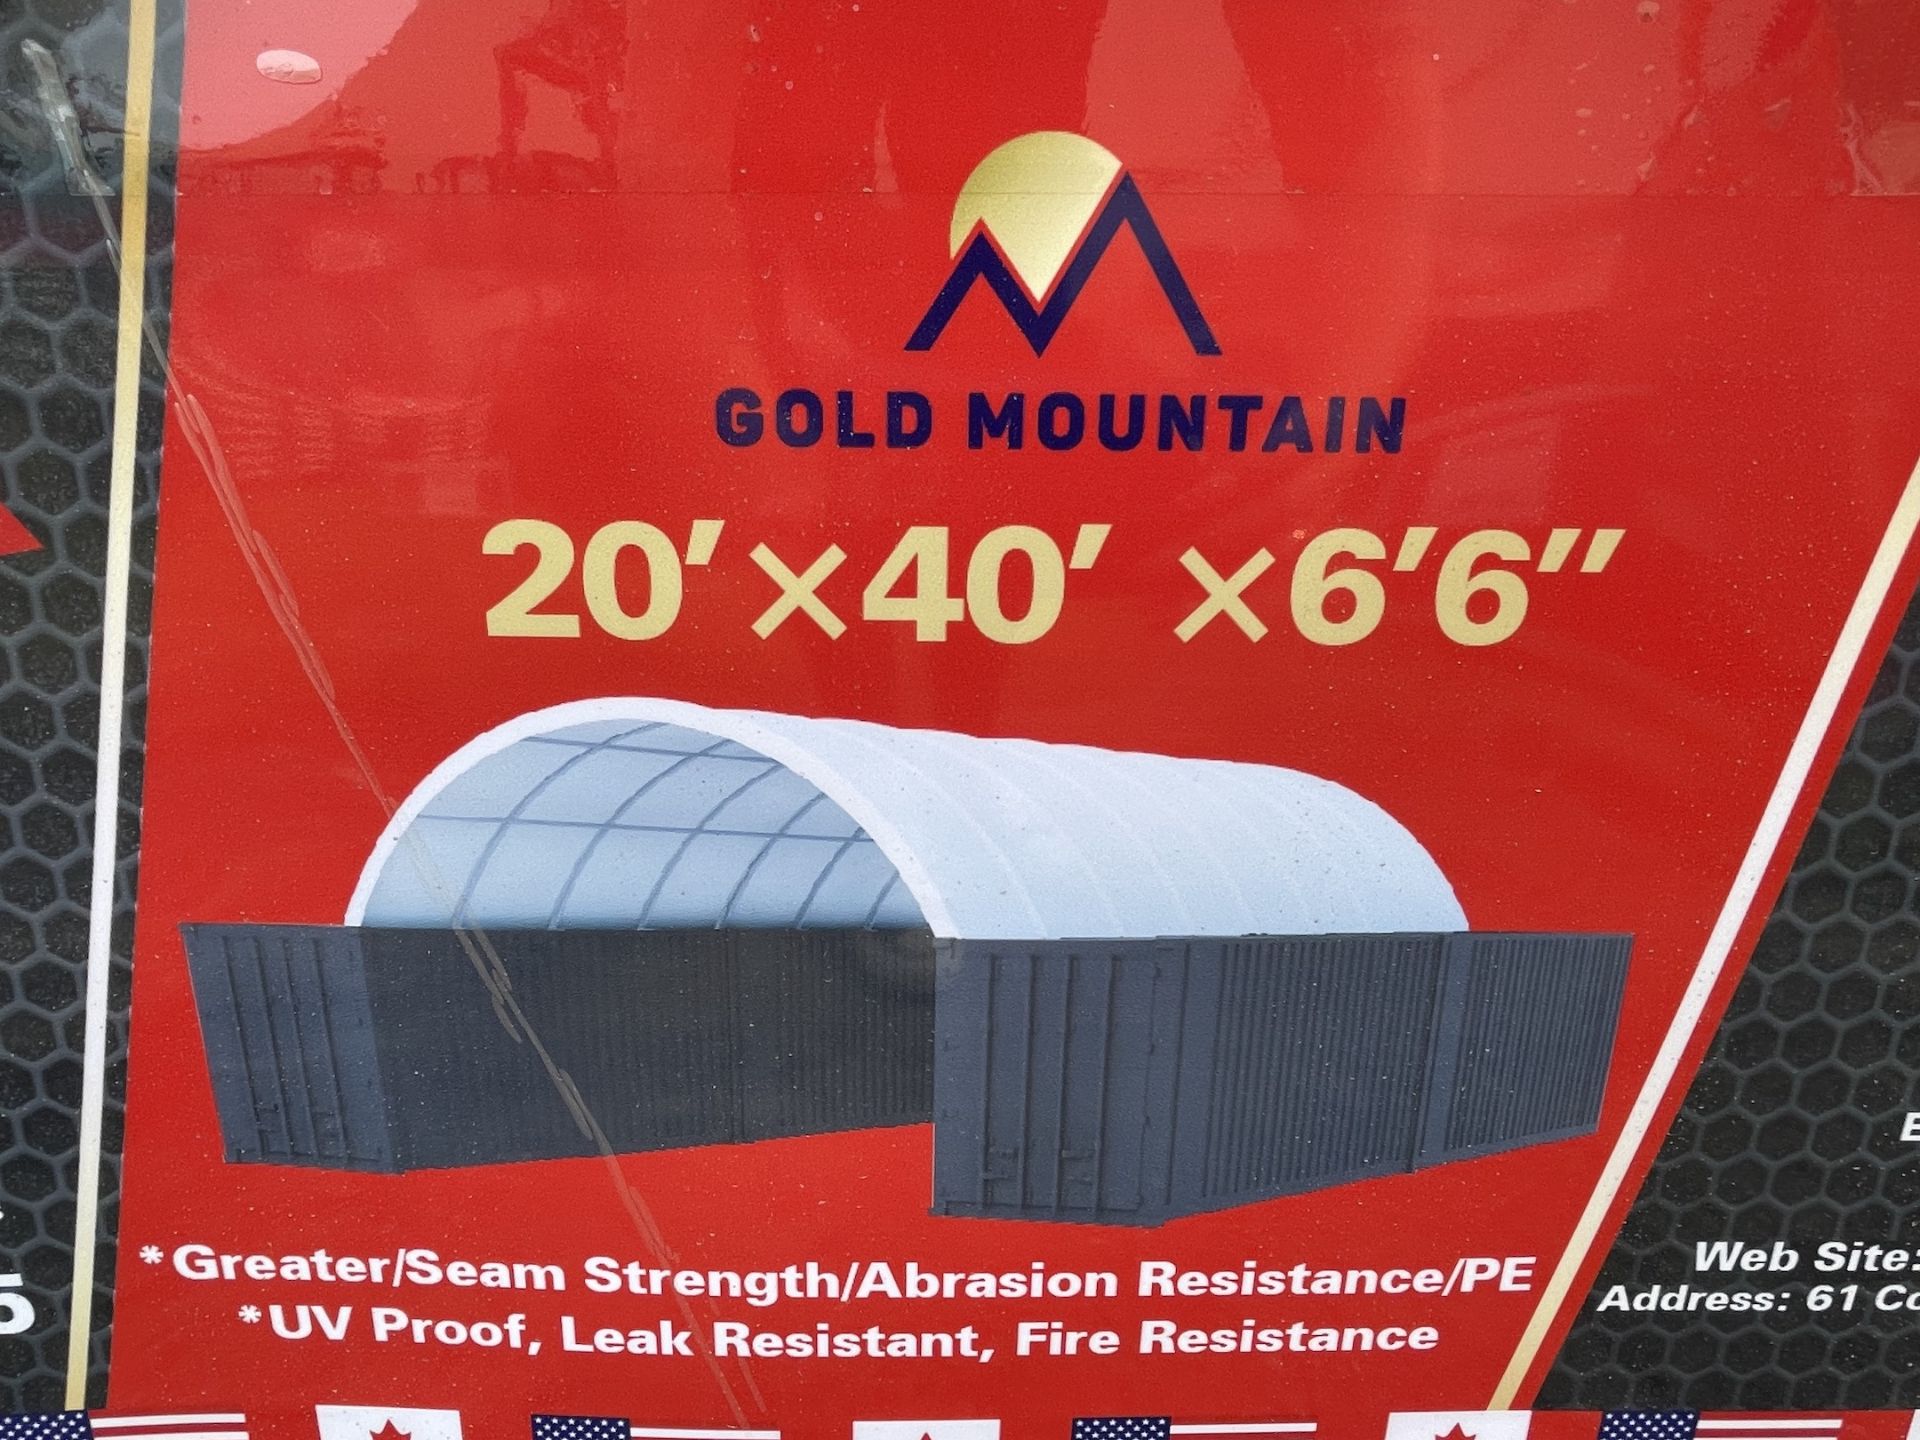 Brand New Unused Gold Mountain 20'X40'X6'6" Dome Shelter Container (NY57) - Image 3 of 4